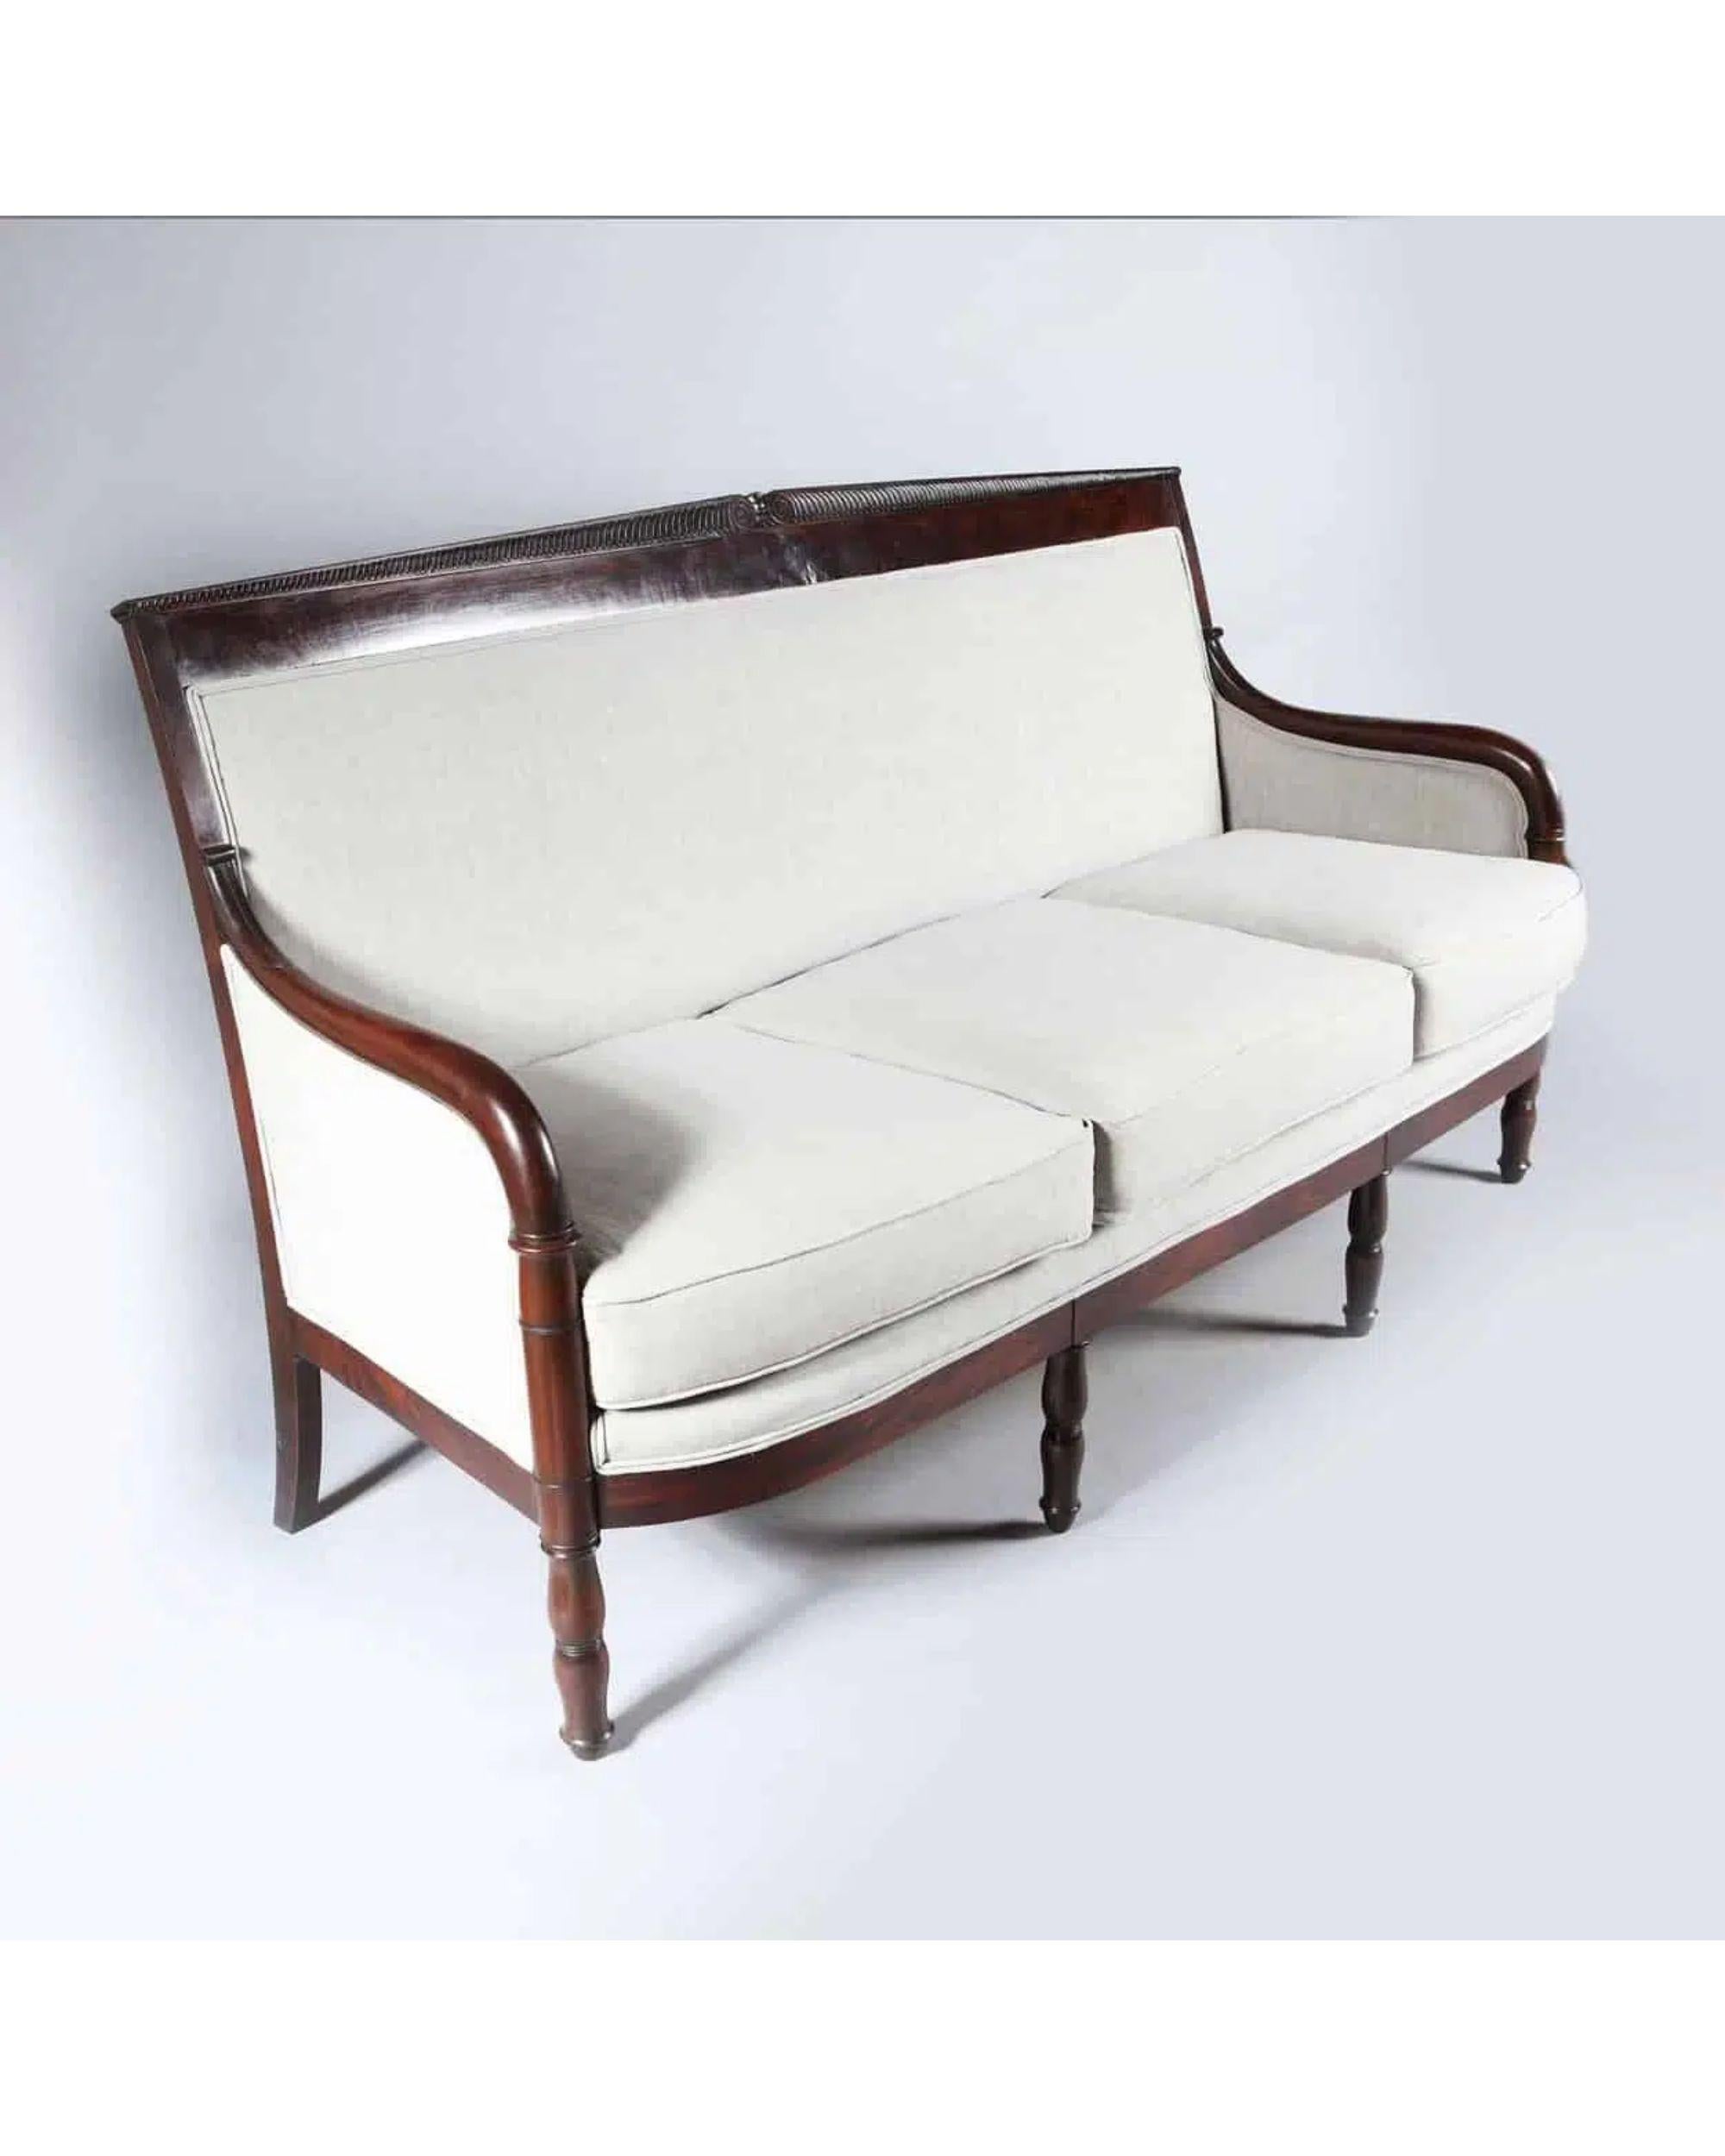 Early 19th Century French Empire Mahogany Settee

An Empire finely carved dark figured mahogany three seat settee, the back is surmounted by facing scrolls with strigilated flutes below. The settee stand on turned double baluster legs at the front